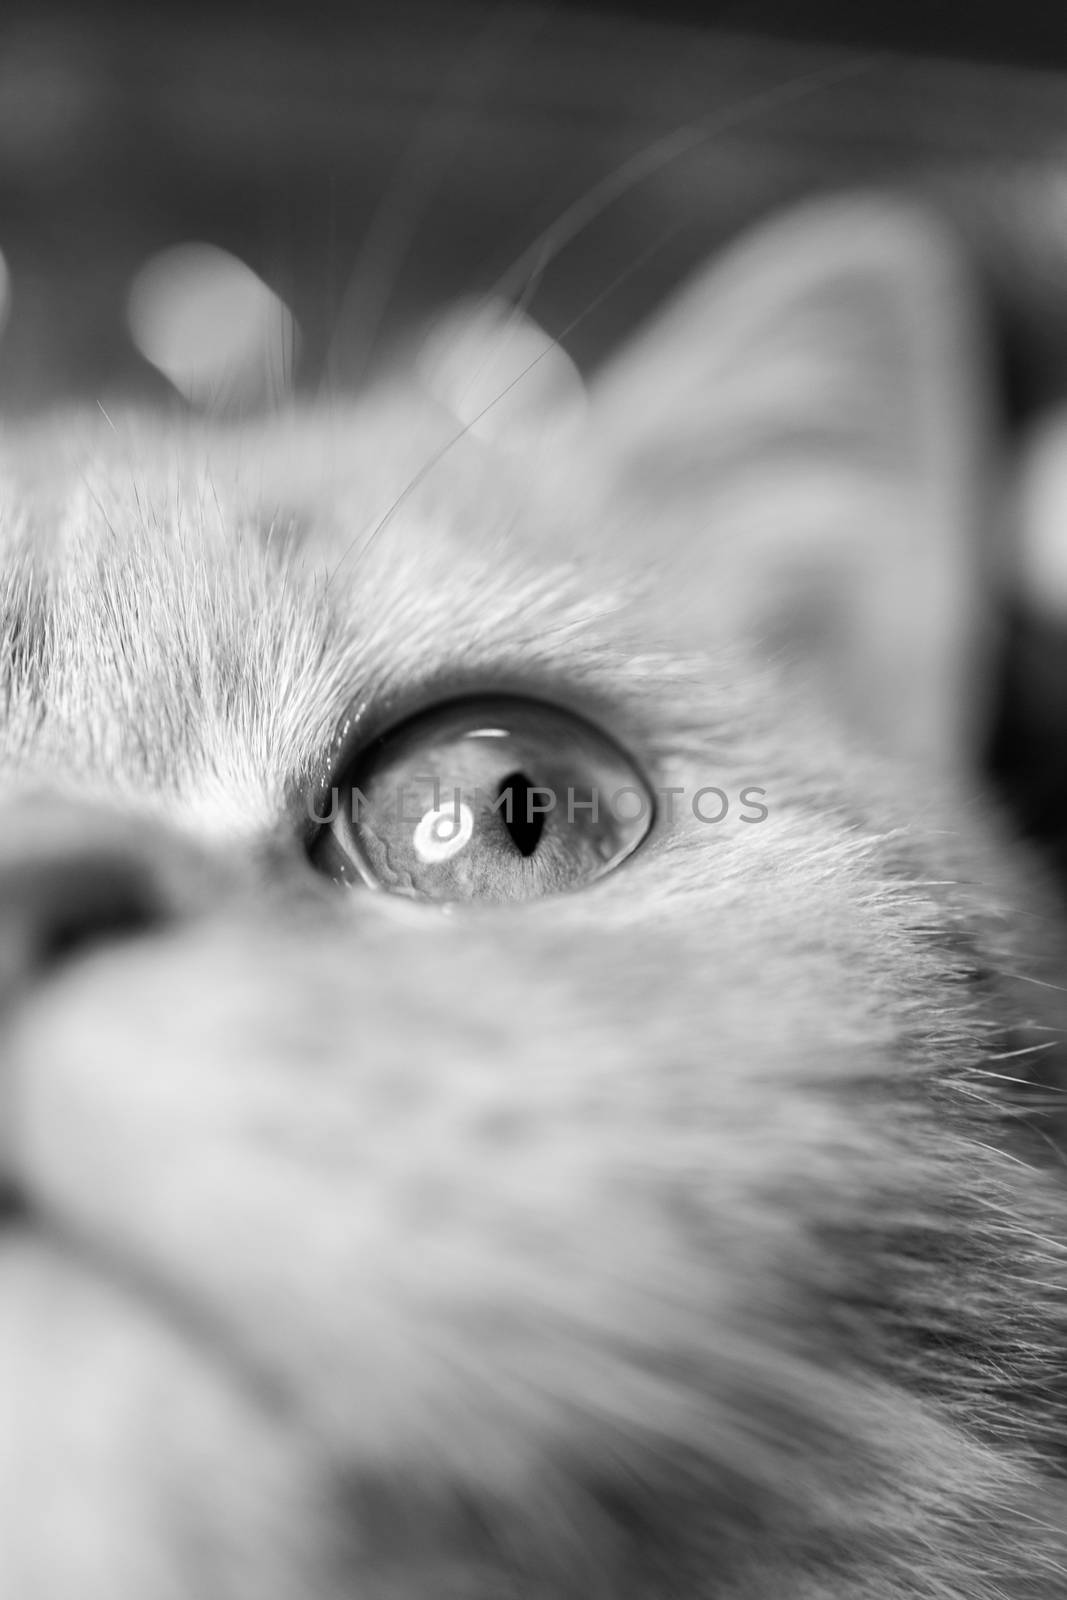 Temperamental british domestic cat looking up with one eye. Closeup view. Black and white photo. Monochrome photo with blurred background.